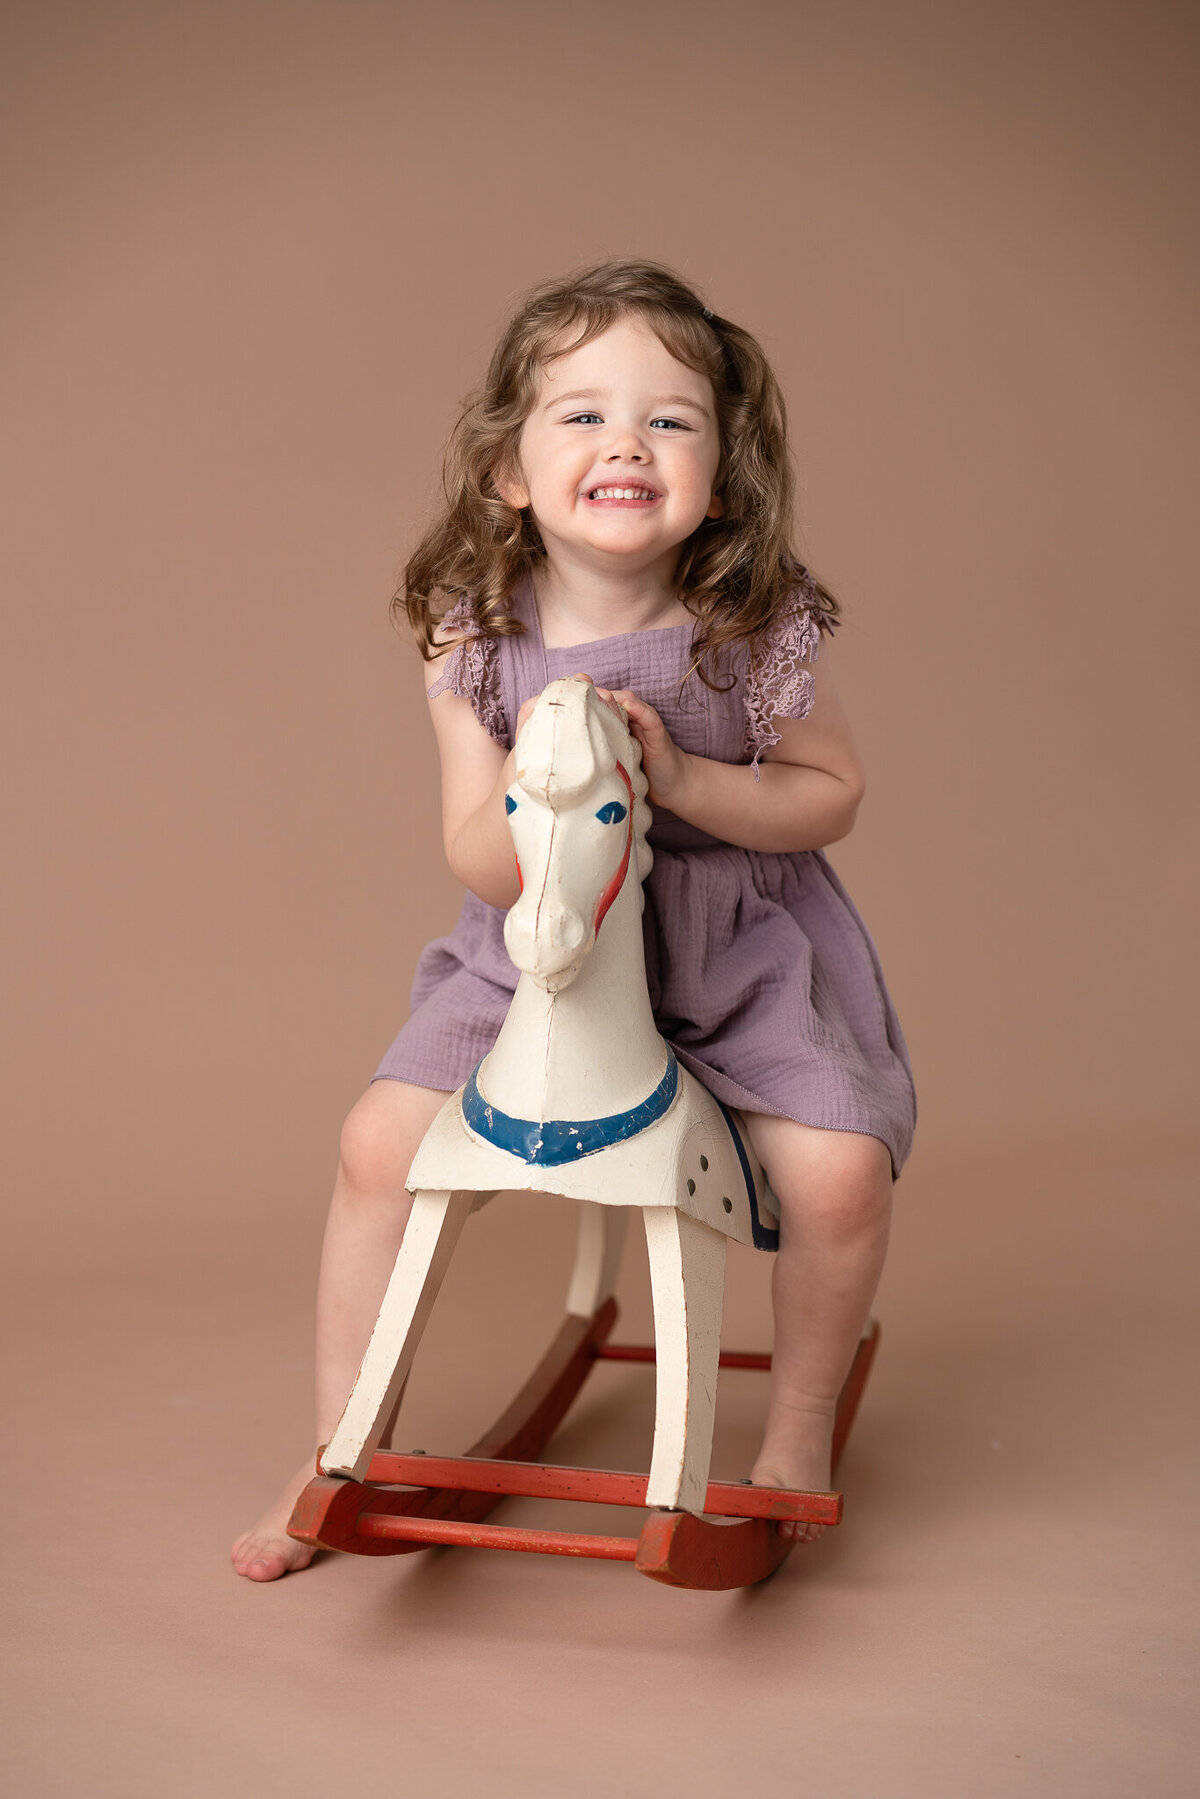 A young girl in a purple dress is riding an old rocking horse and smiling.